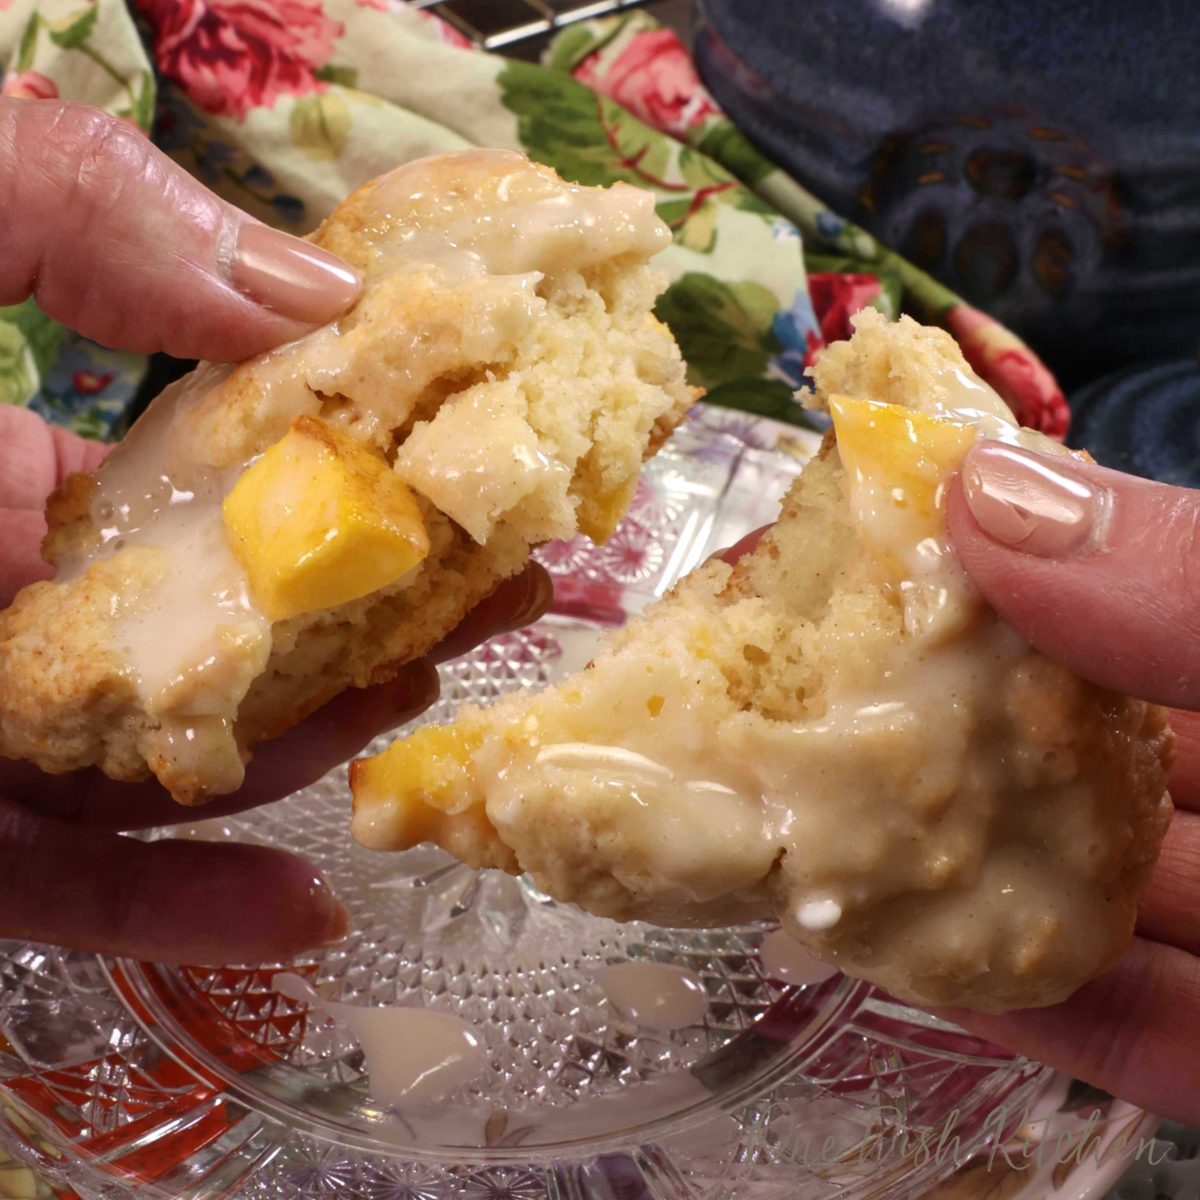 a hand holding a peach scone and breaking it in half over a plate.